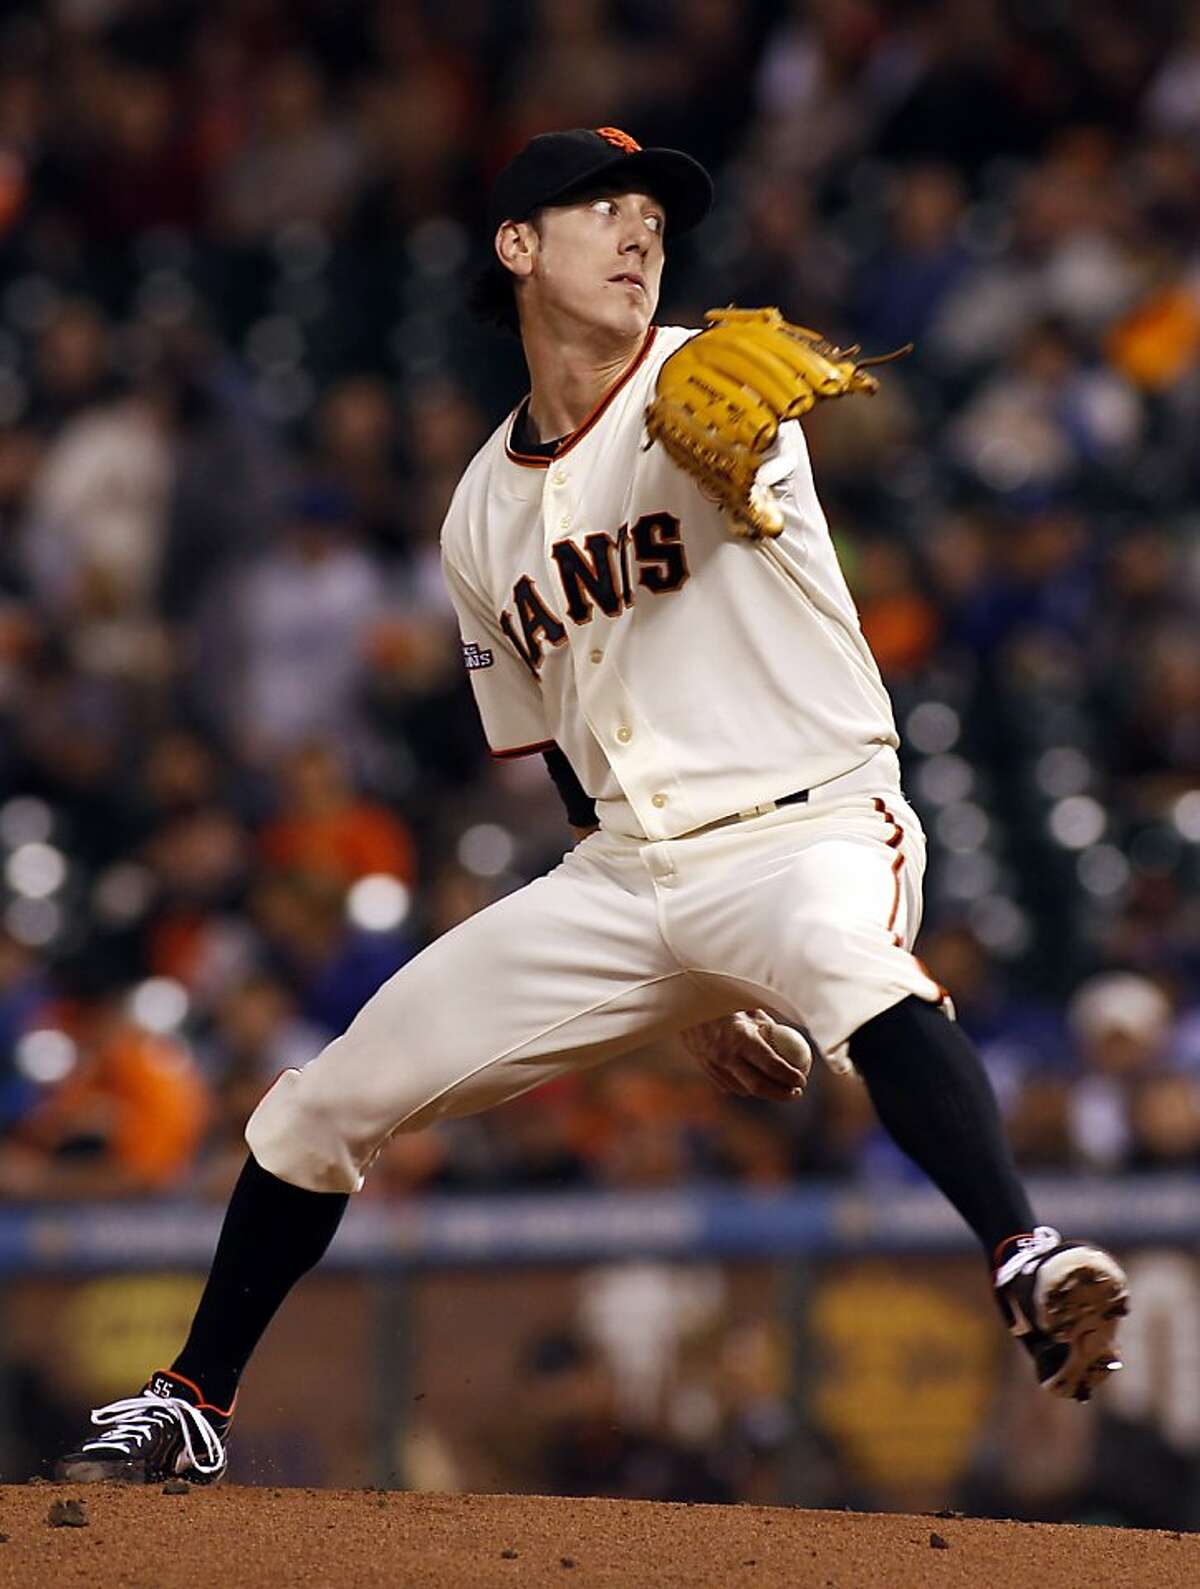 San Francisco Giants pitcher Tim Lincecum throws to the Los Angeles Dodgers during the first inning of a baseball game in San Francisco, Thursday, Sept. 26, 2013. (AP Photo/George Nikitin)